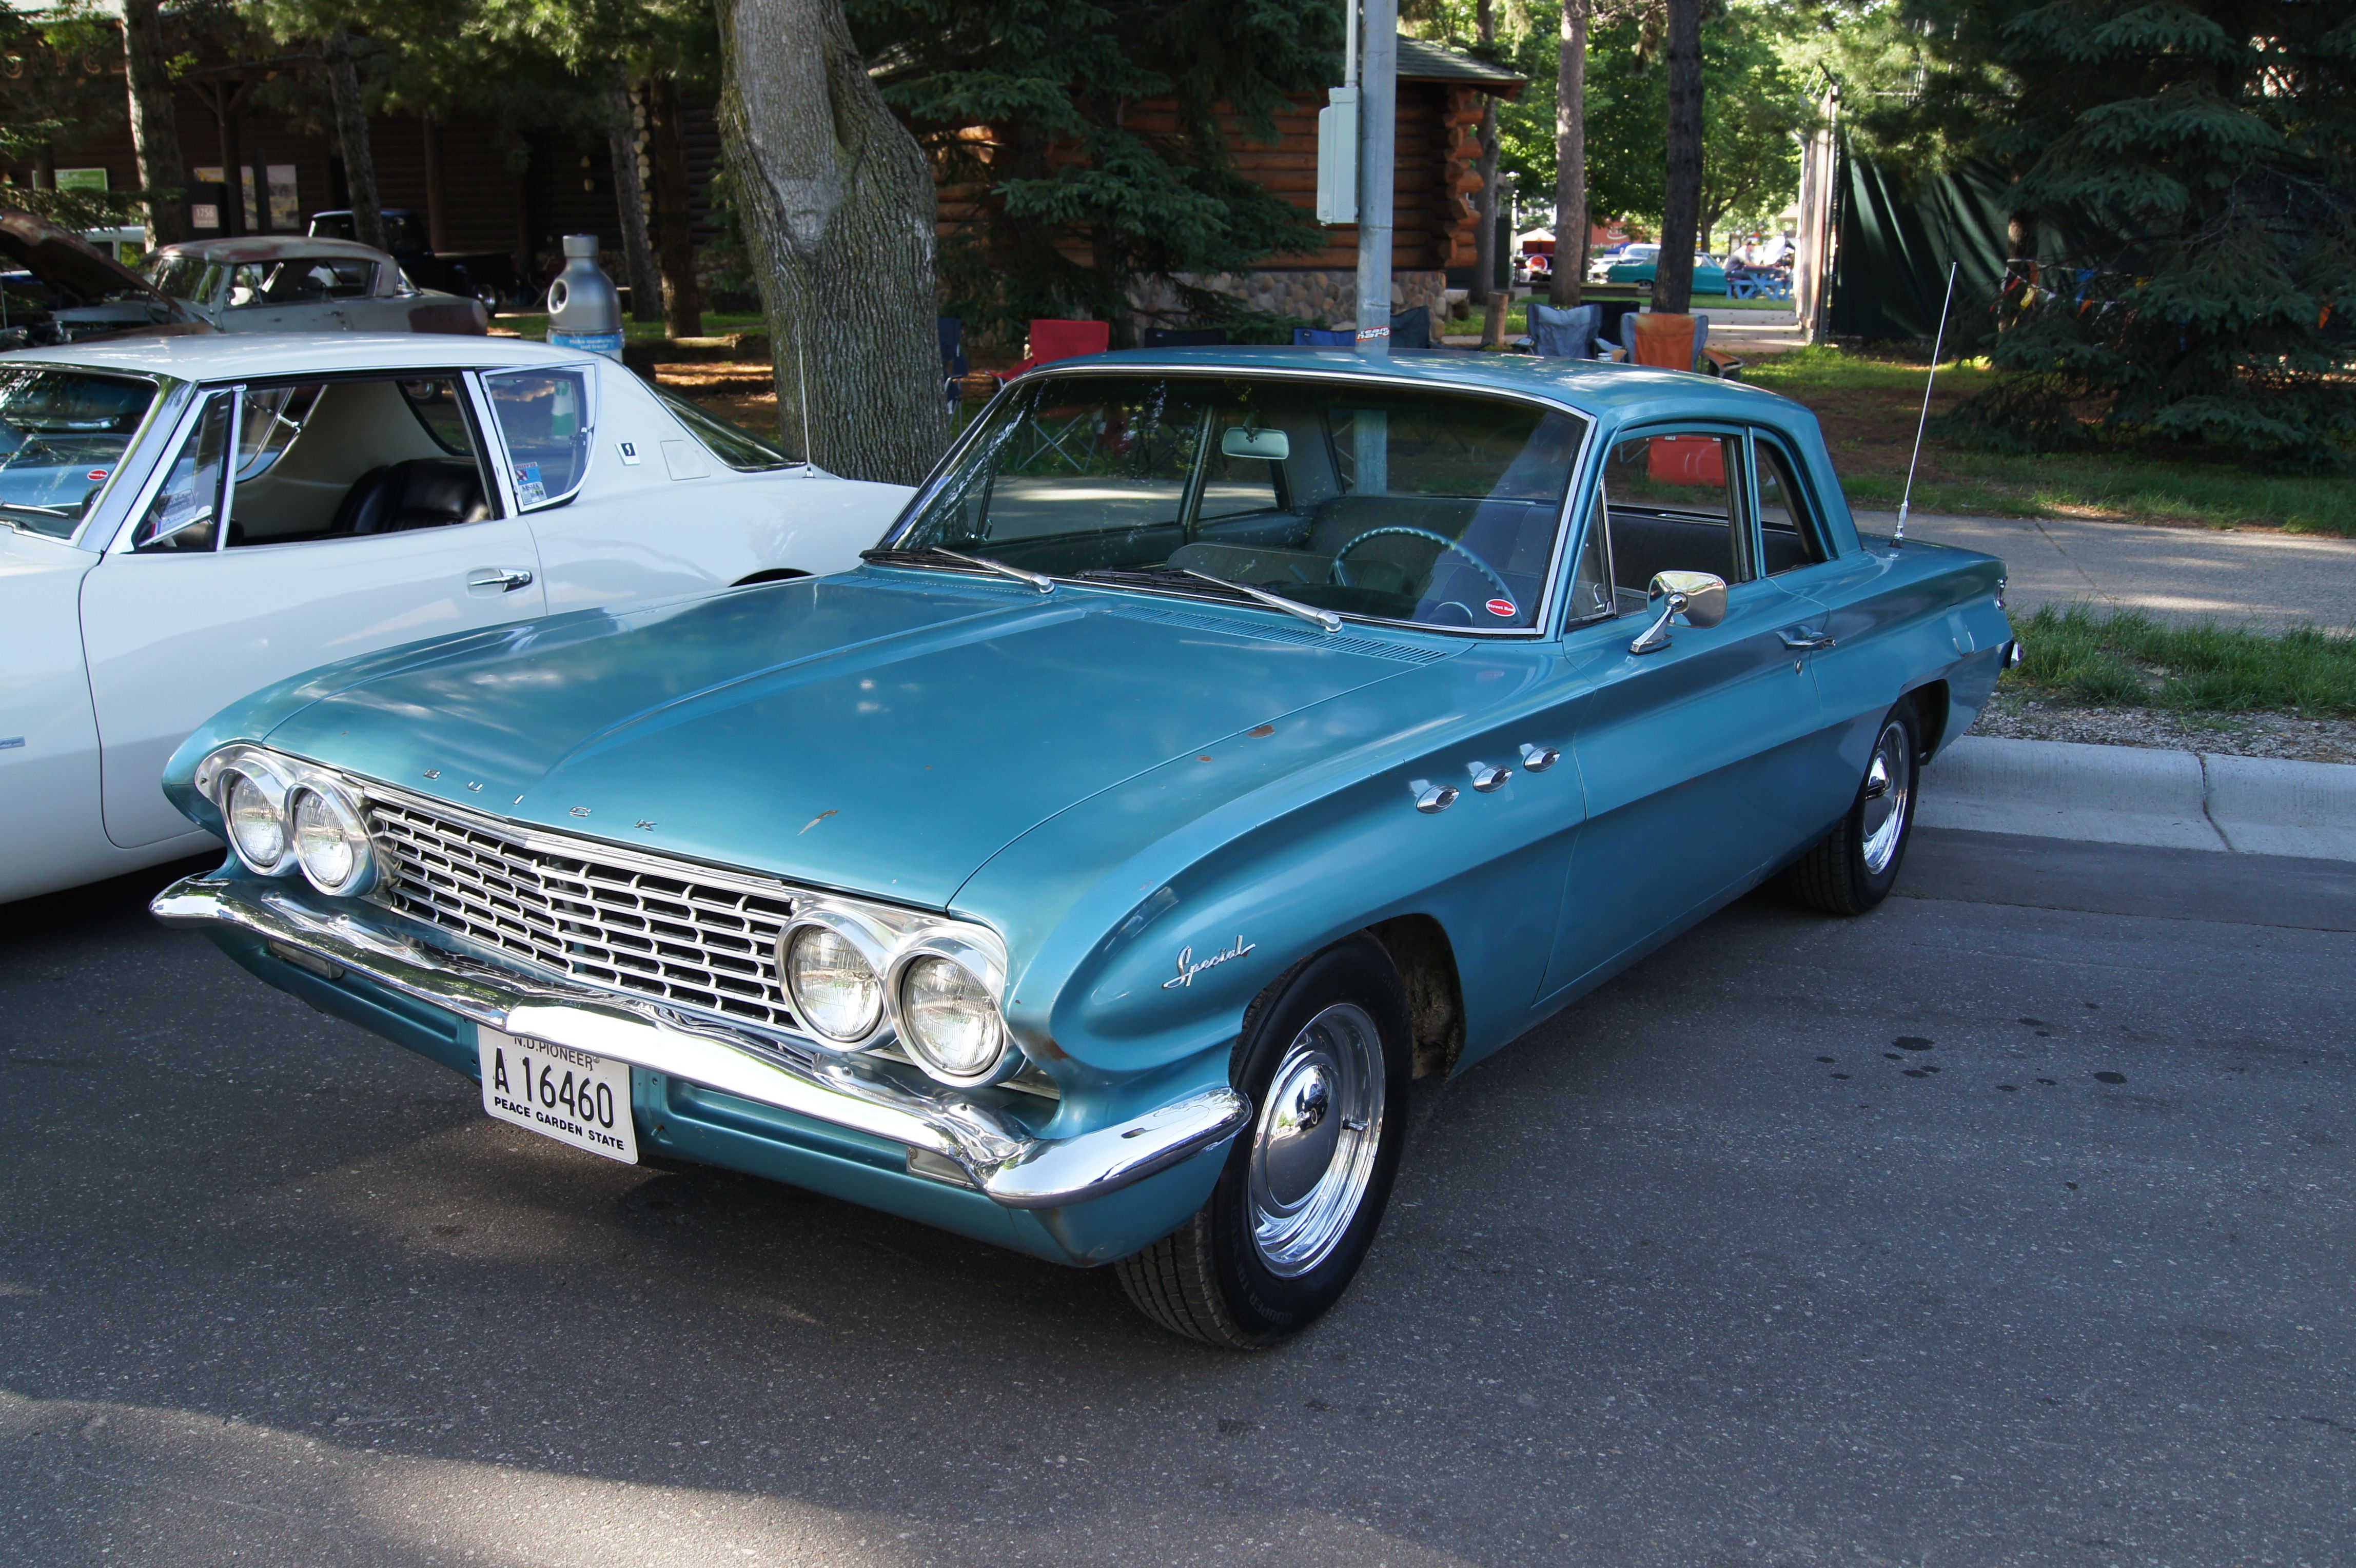 1961 Buick Special: The compact car that made a name for itself.